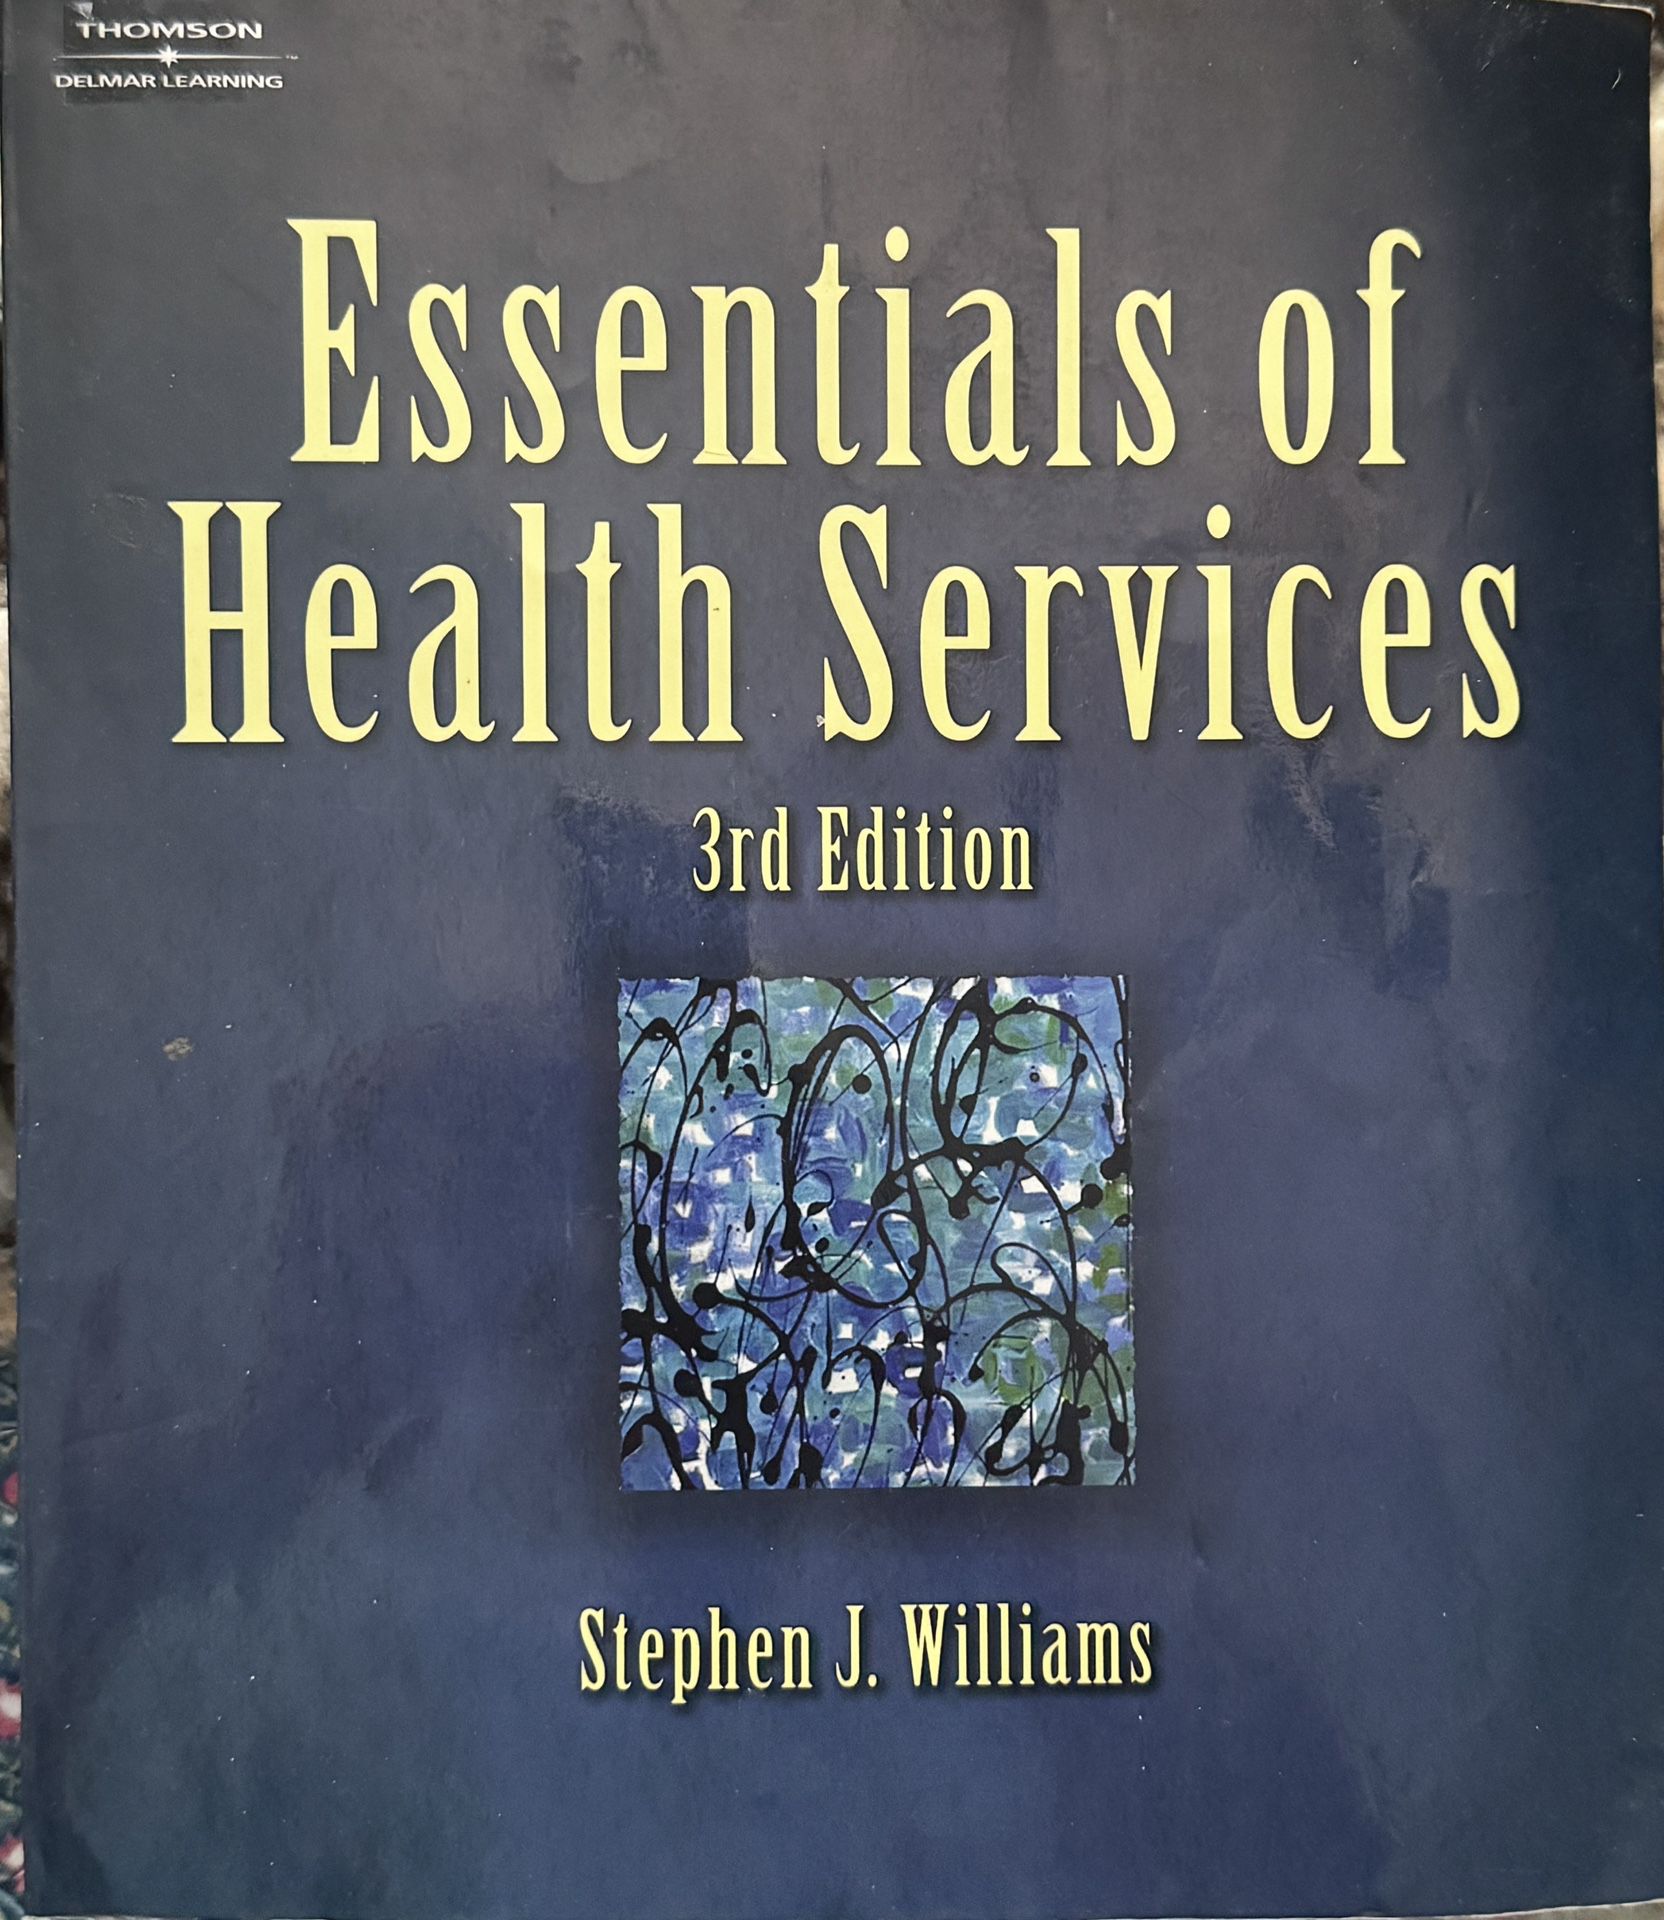 Essential of Health Services 